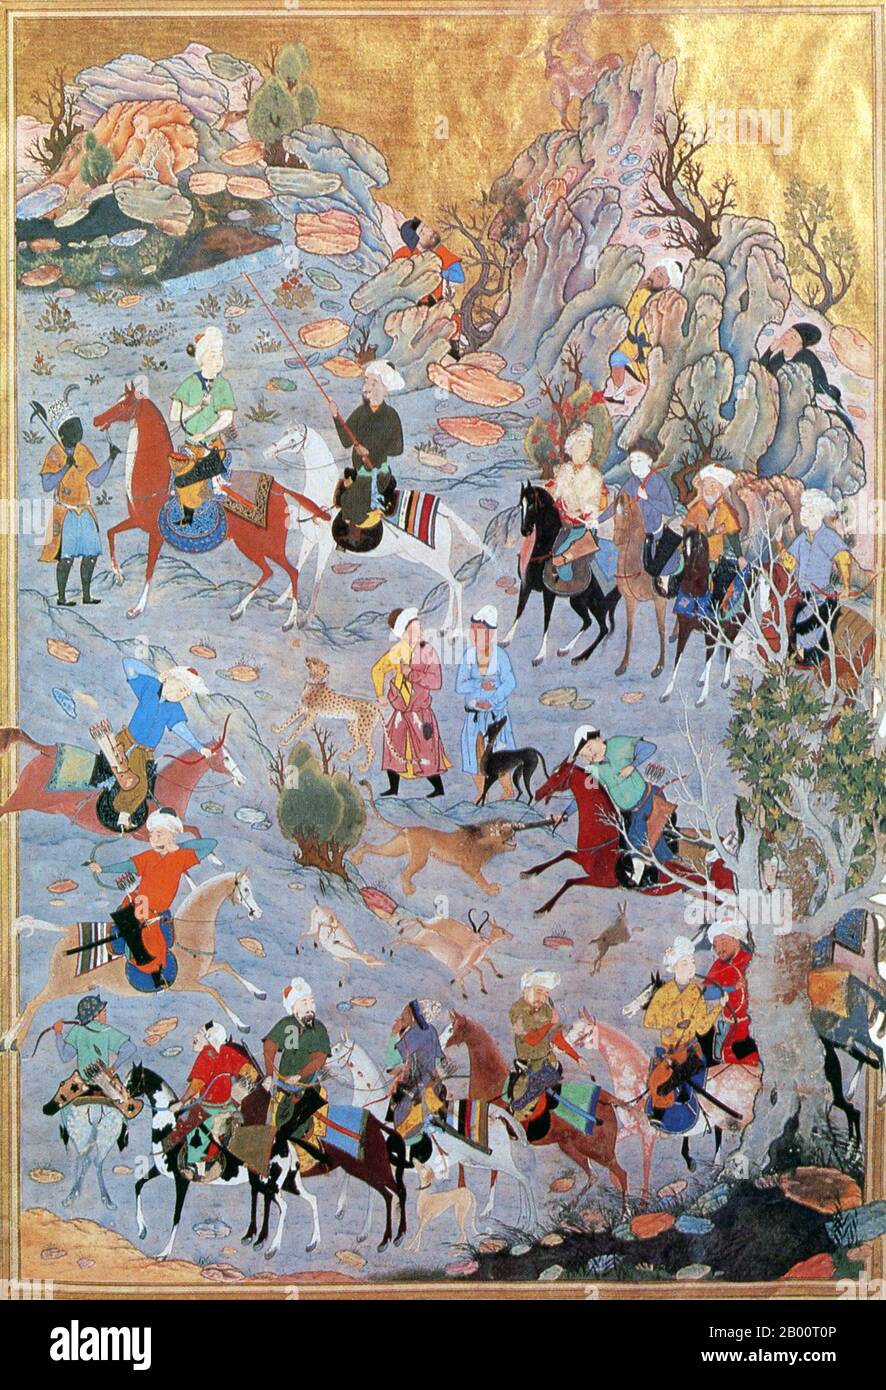 Afghanistan: Late 15th century painting of a hunting scene from the Hast Bahist by Kamal al-Din Bihzad.  Kamal ud-Din Behzad Herawi (c. 1450 - c. 1535), also known as Kamal al-din Bihzad or Kamaleddin Behzad, was a painter of Persian miniatures and head of the royal ateliers in Herat and Tabriz during the late Timurid and early Safavid periods. An orphan, he was raised by the prominent painter Mirak Naqqash, and was a protege of Mir Ali Shir Nava'i. His major patron in Herat was the Timurid sultan Husayn Bayqarah (ruled 1469 - 1506). Stock Photo